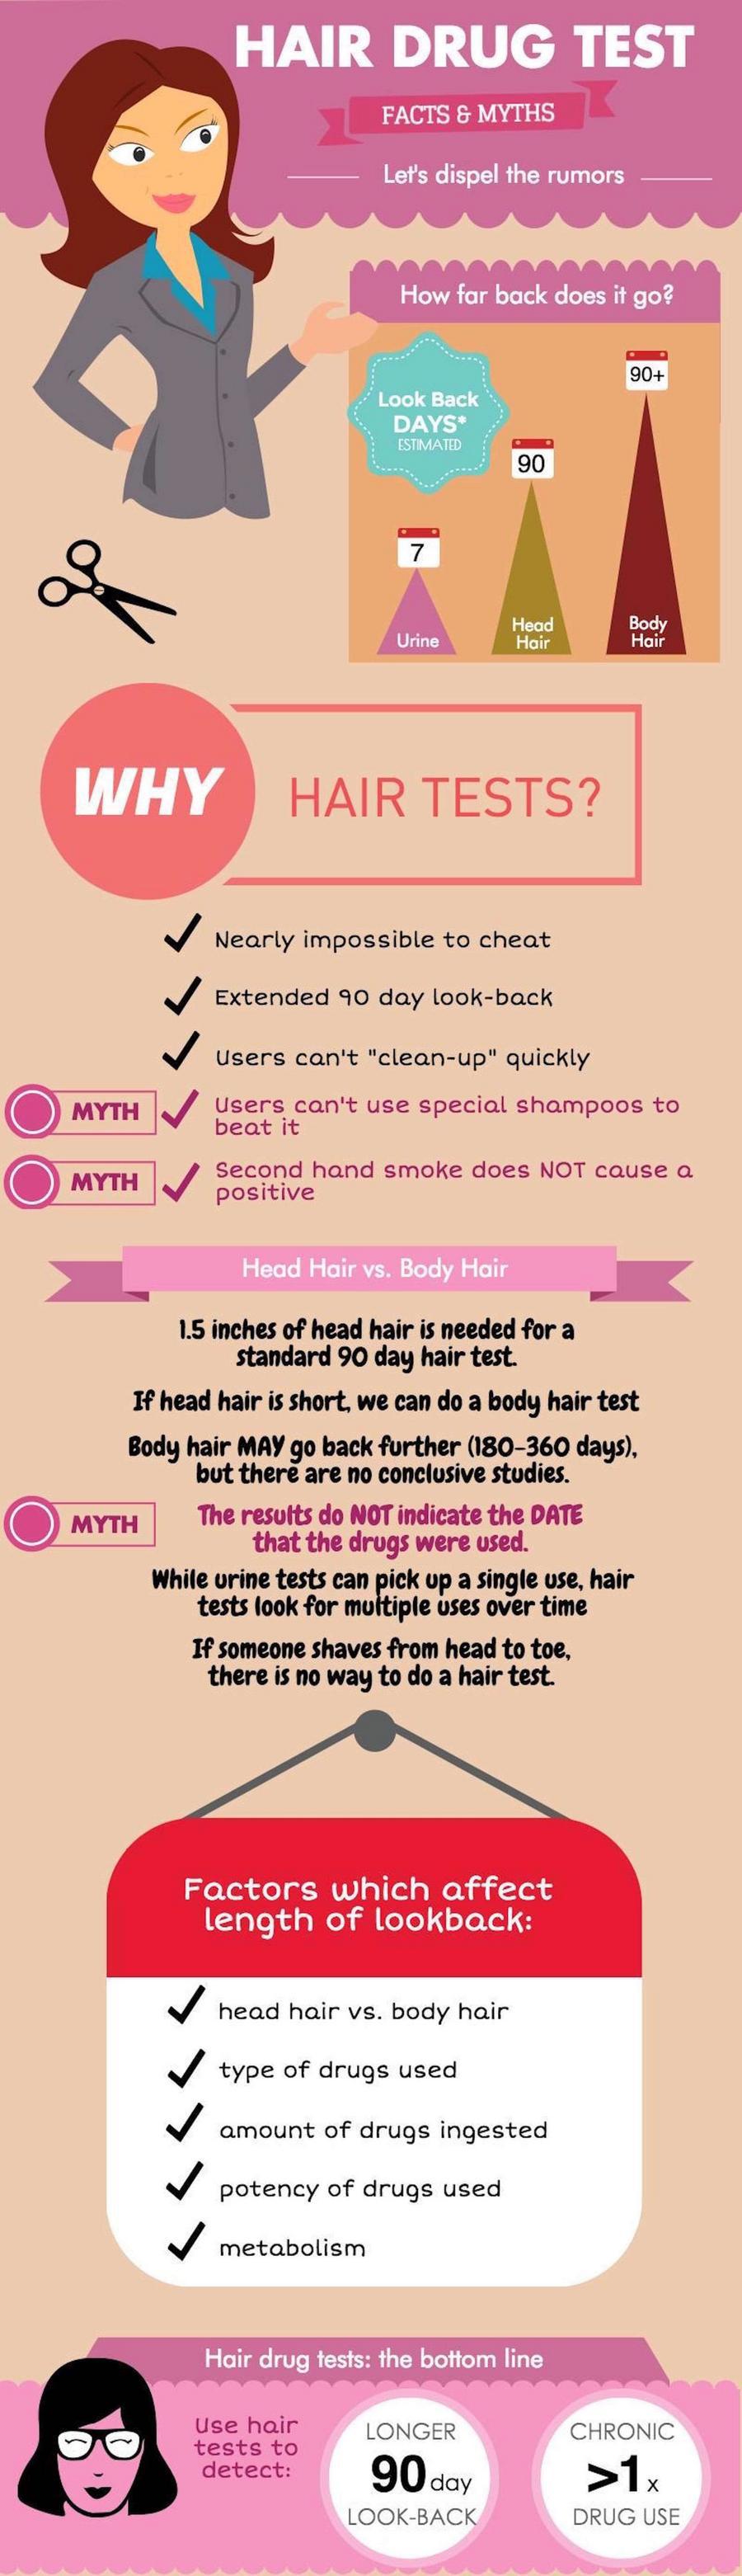 Hair Follicle Drug Testing Frequently Asked Questions - infographic